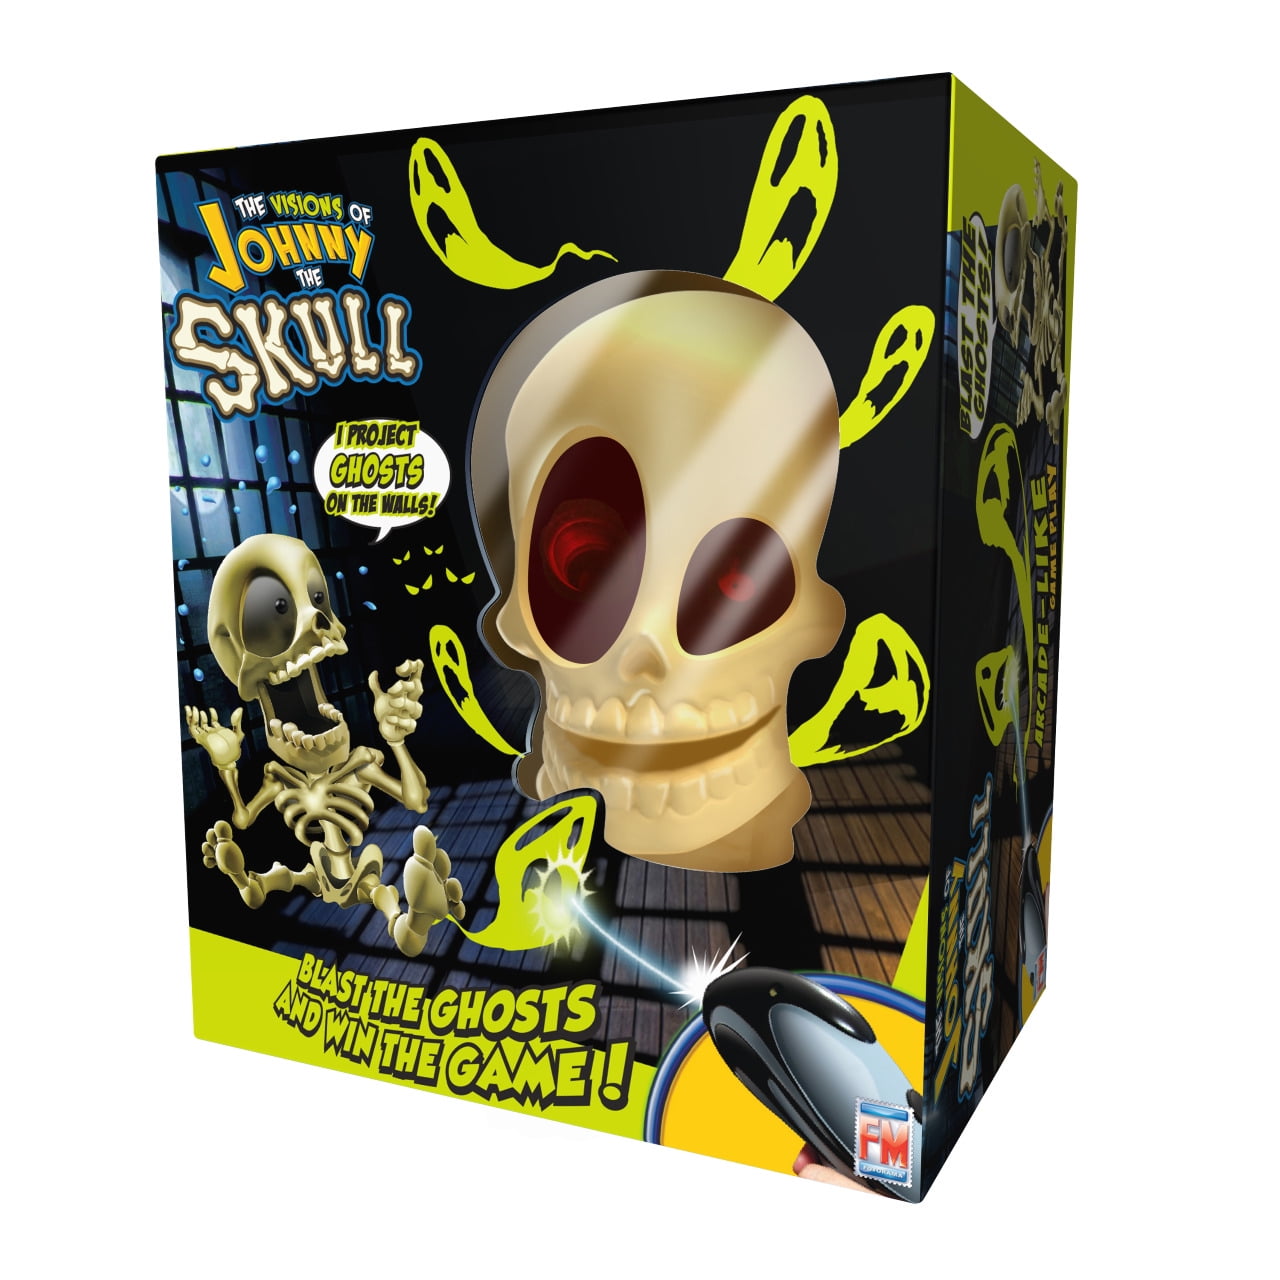 Fotorama Johnny the Skull, Blast the Ghosts for Fun and Adventure, for Children 5+